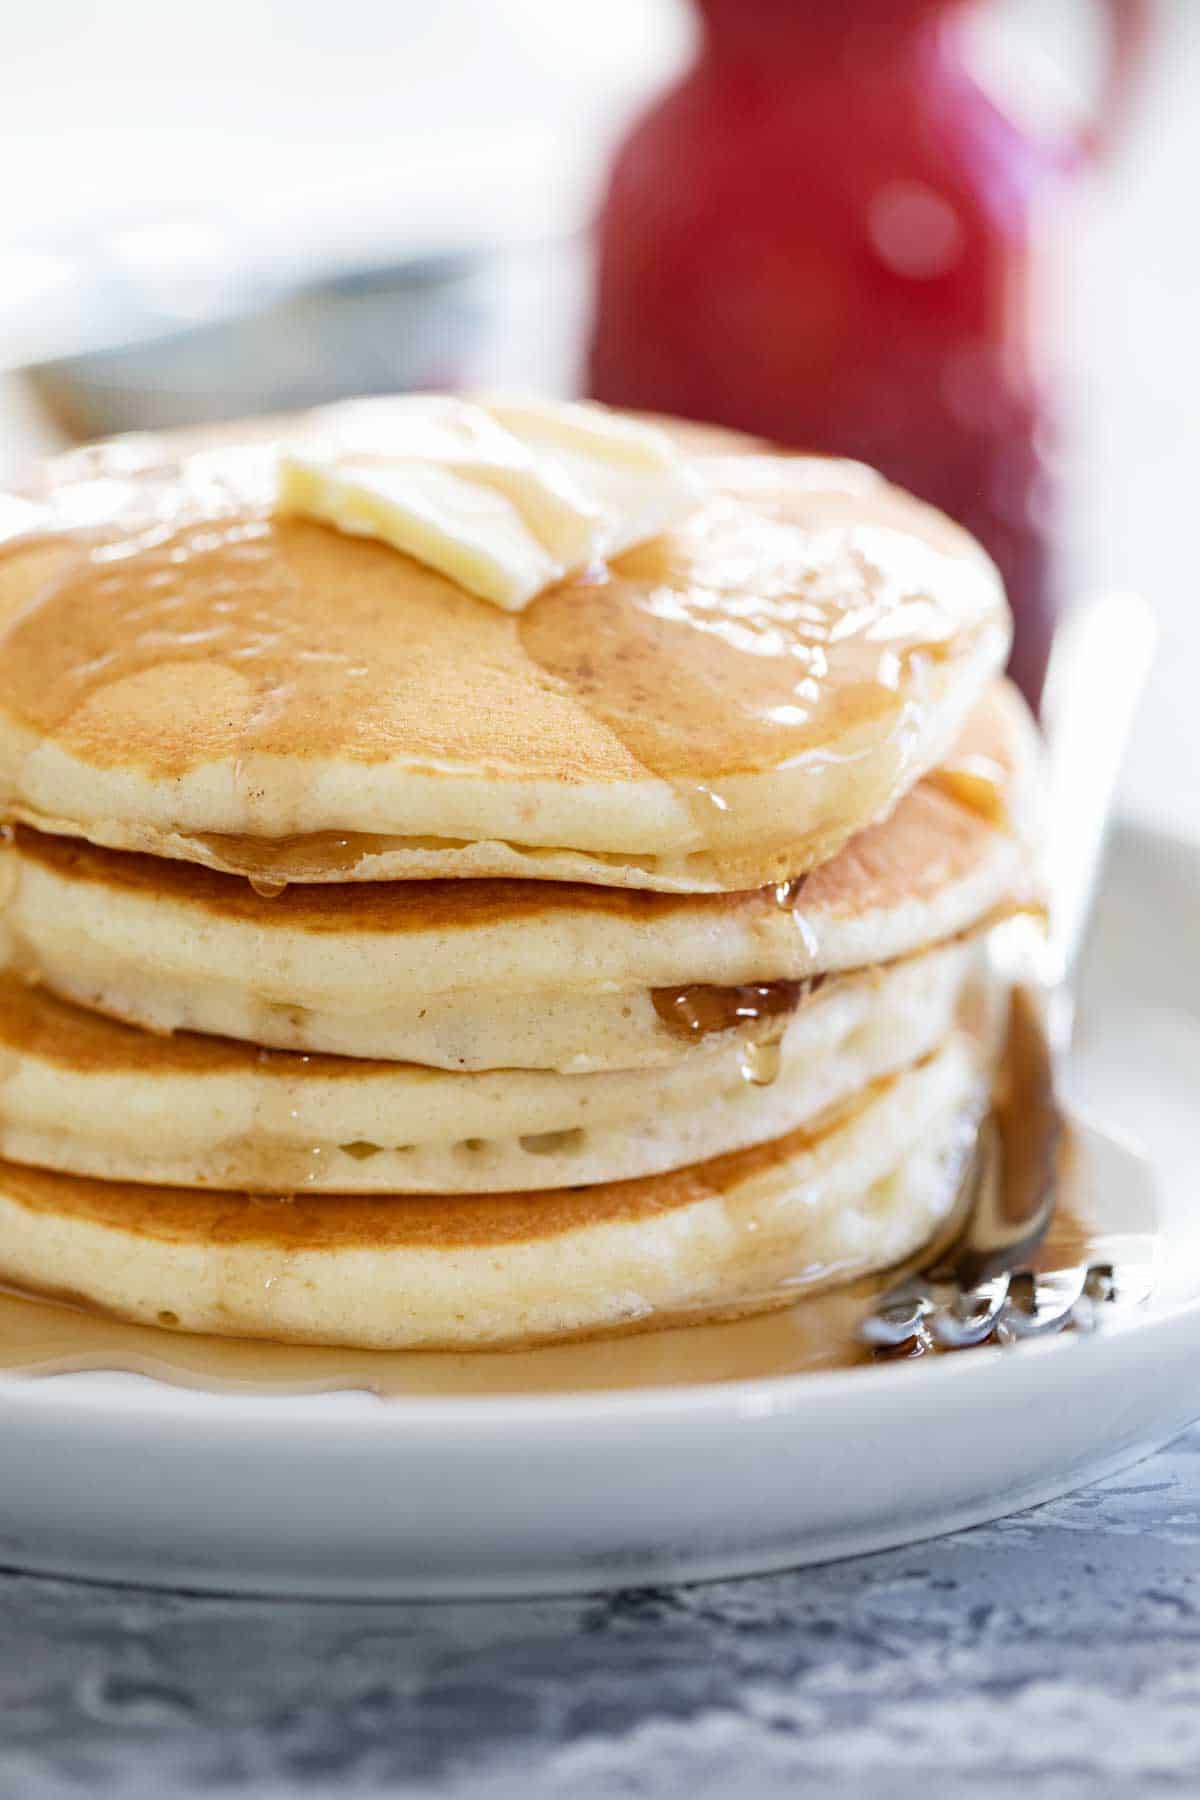 Pancakes recipe - TaighanVincent